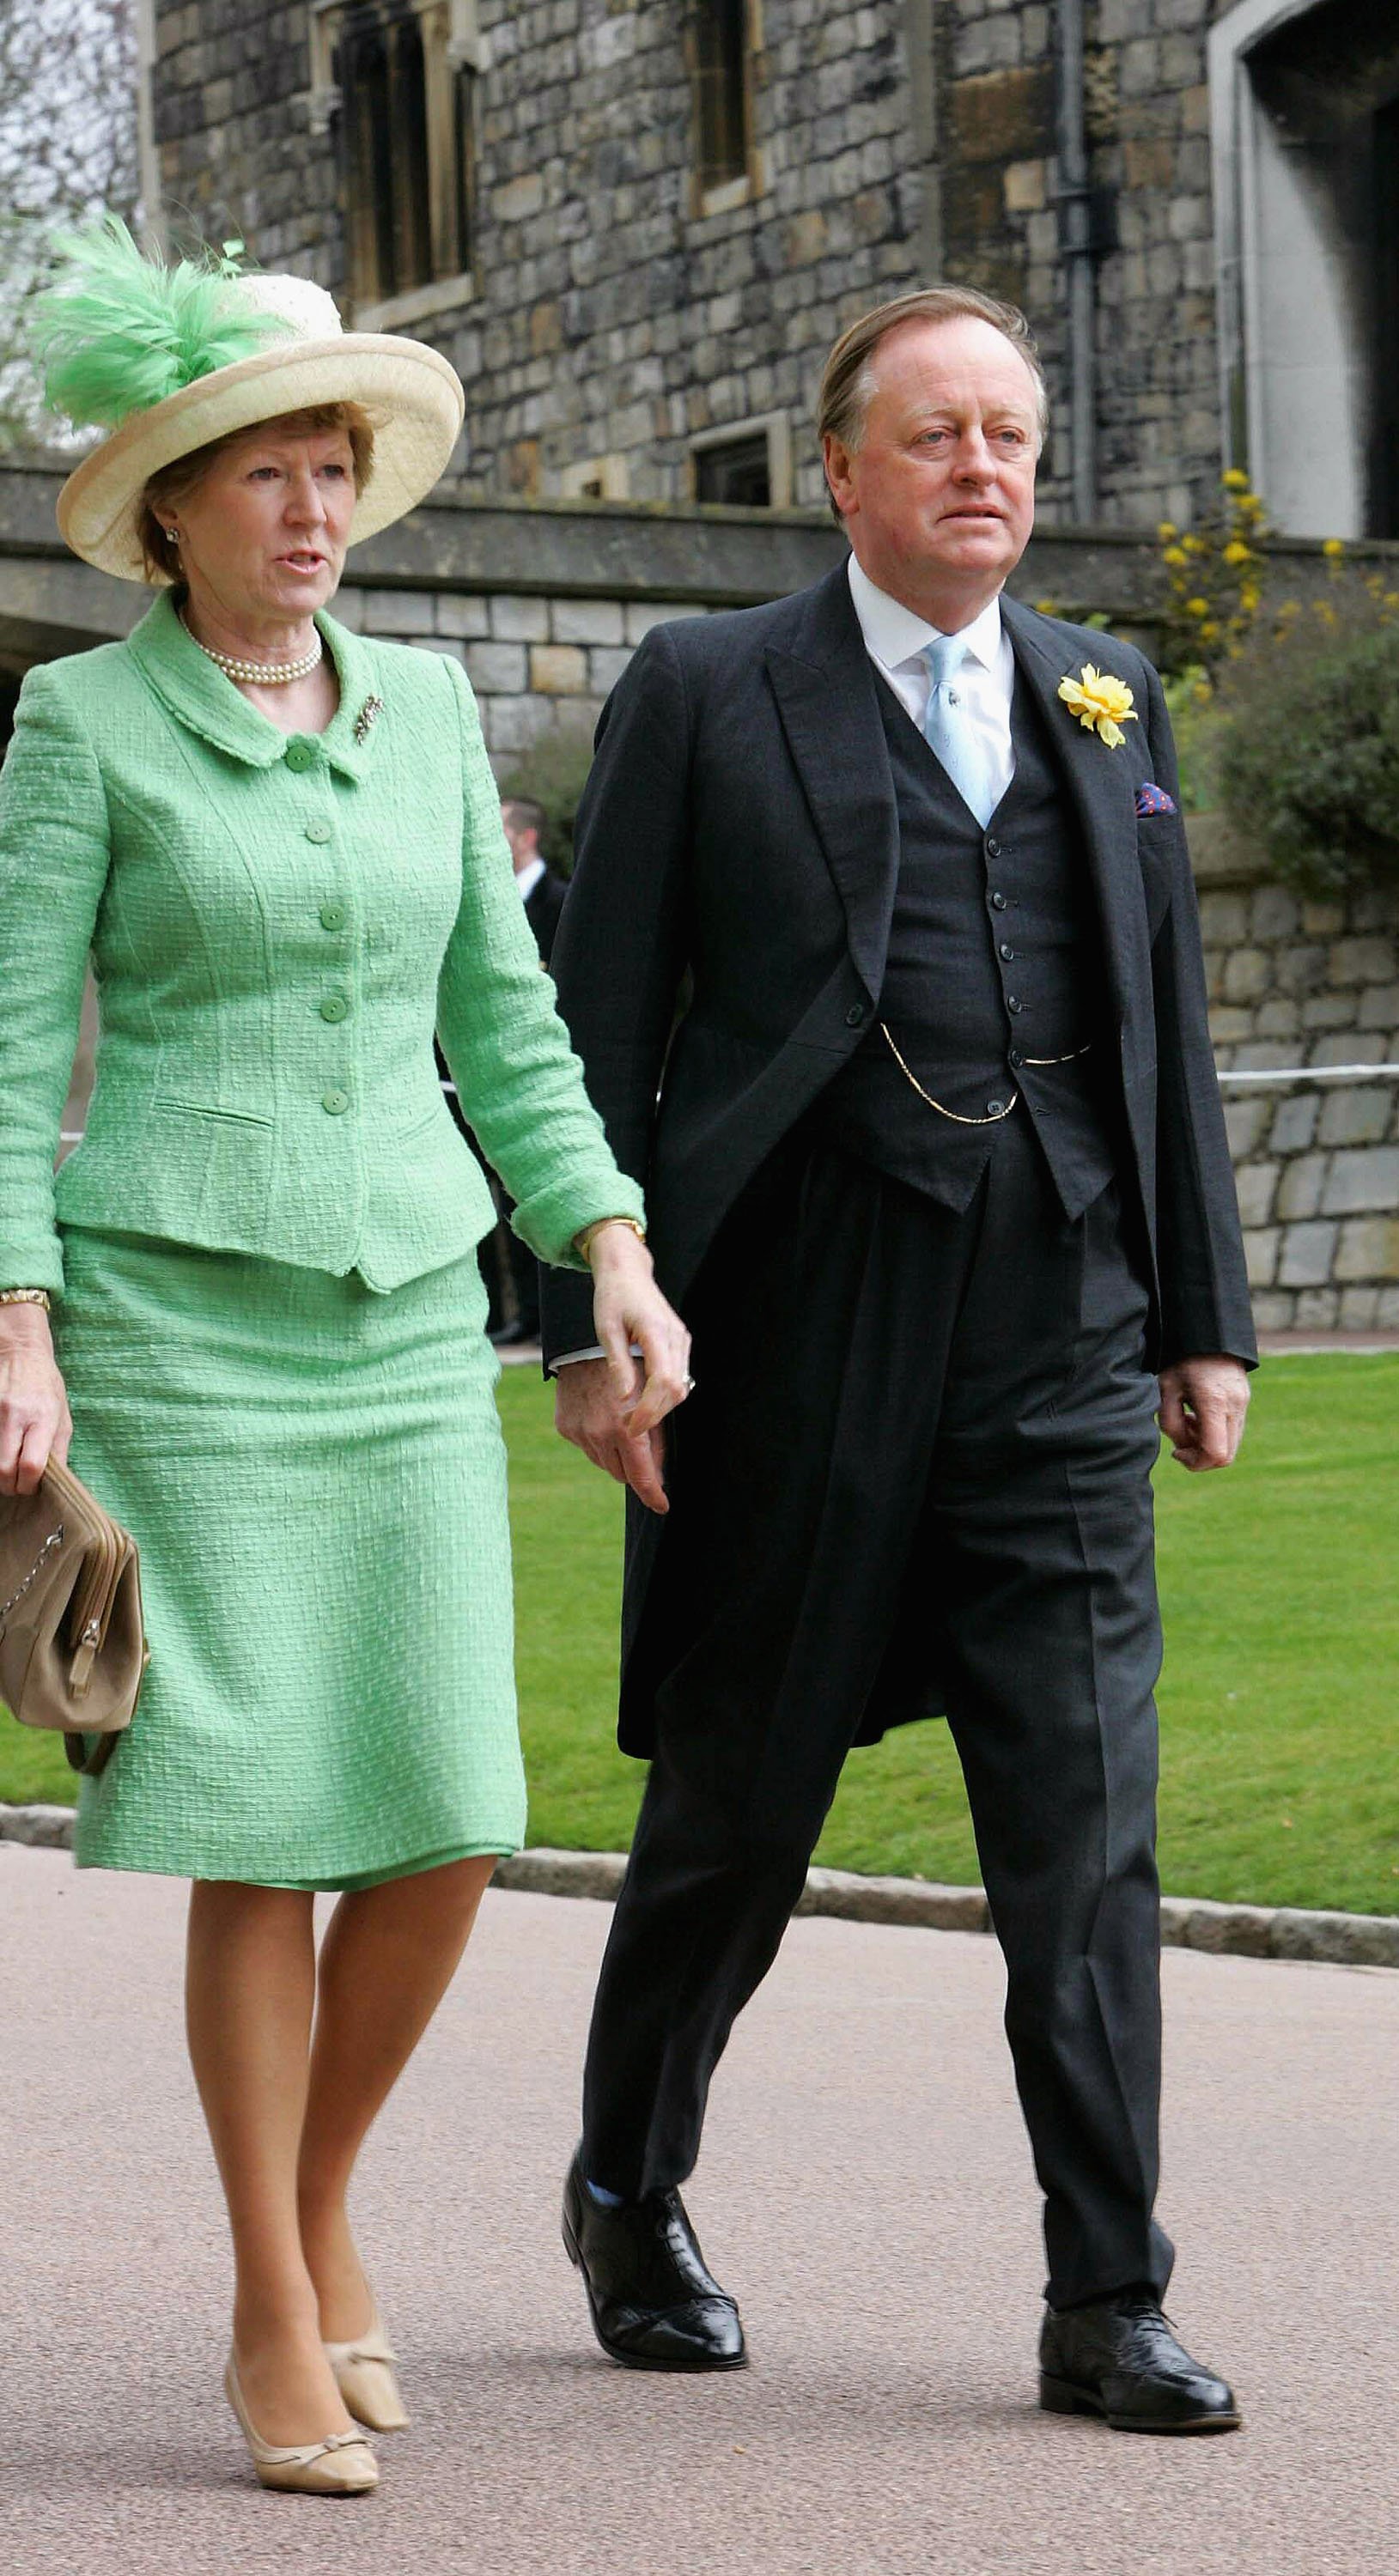 Andrew Parker-Bowles and his second wife Rosemary Parker-Bowles at The Guildhall, at Windsor Castle on April 9, 2005, in Berkshire, England. | Source: Getty Images